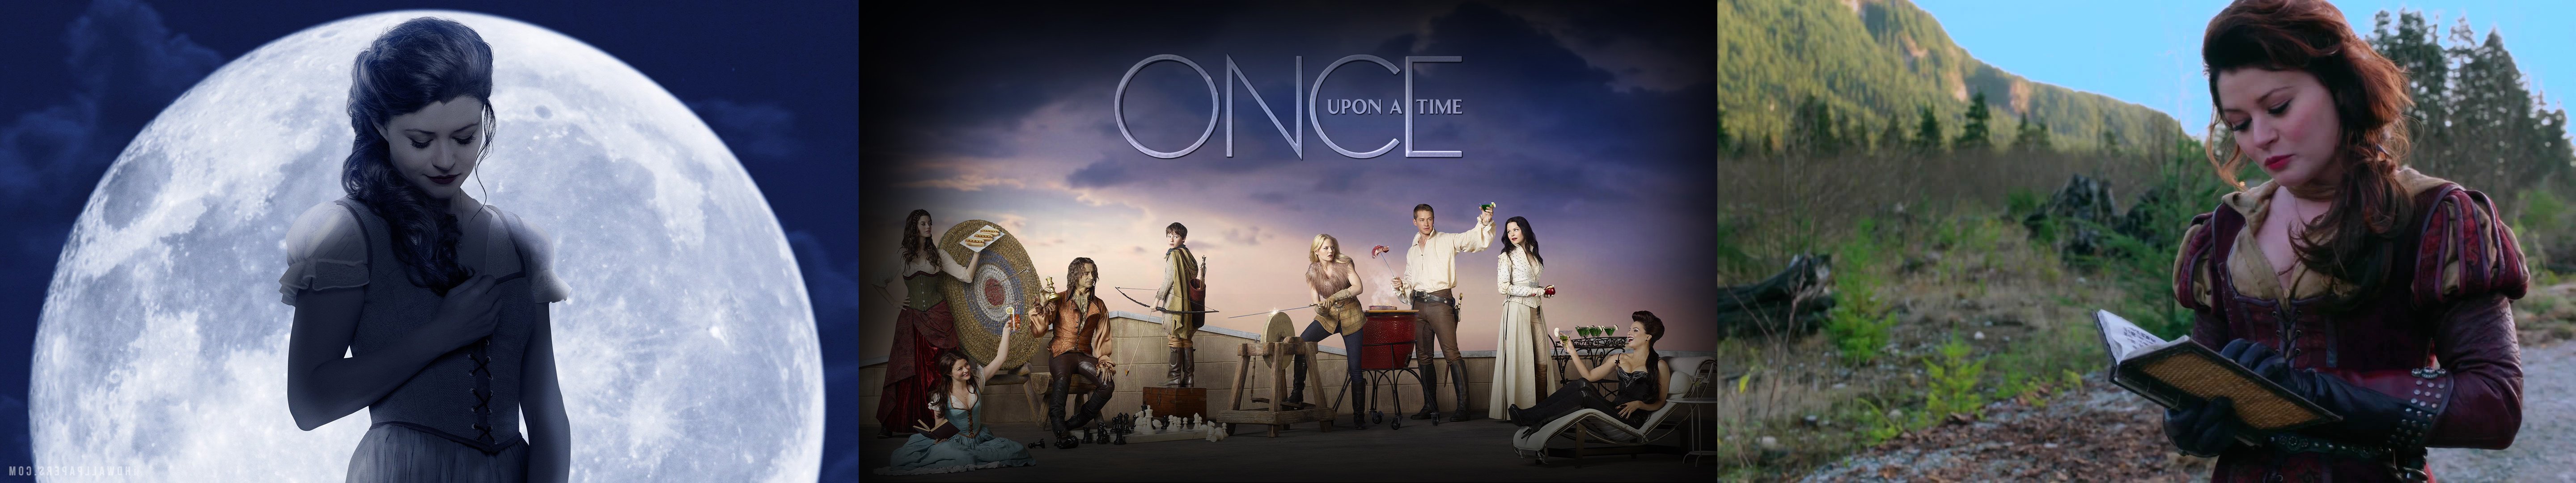 wallpaper, Tiple, Three, Multi, Multiple, Monitor, Screen, Tv, Television, Serie, Once, Upon, A, Time, Il, Etait, Une, Fois Wallpaper